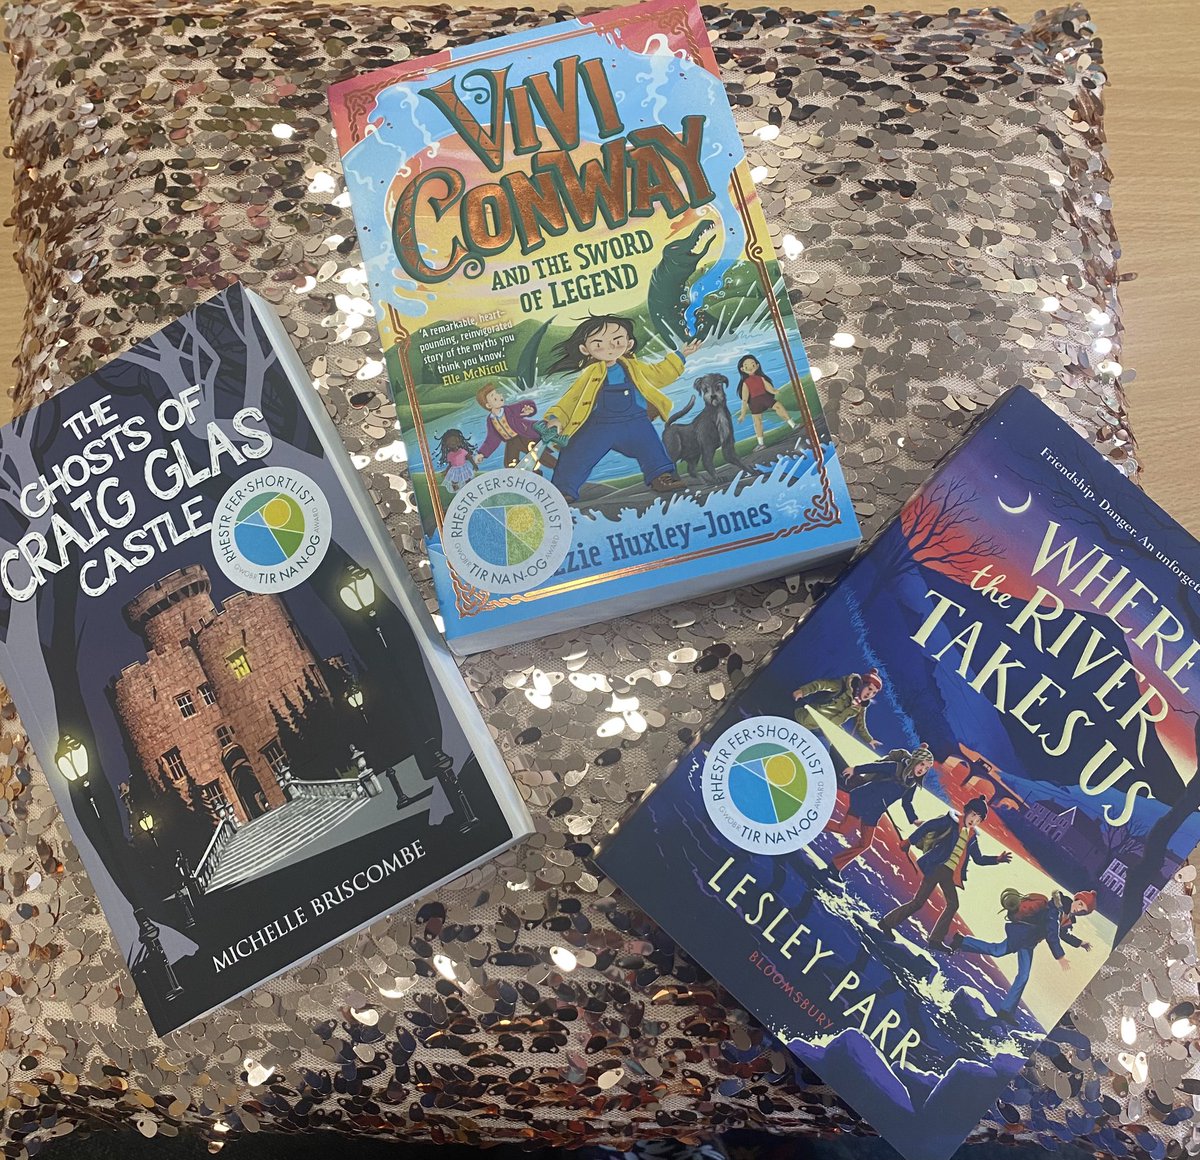 We cant wait to read and review these books that have been shortlisted for the Tir Na Nog award 2024 @ShonedD @LlyfrDaFabBooks @Books_Wales @WelshDragonParr @littlehux @MichelleBrisc